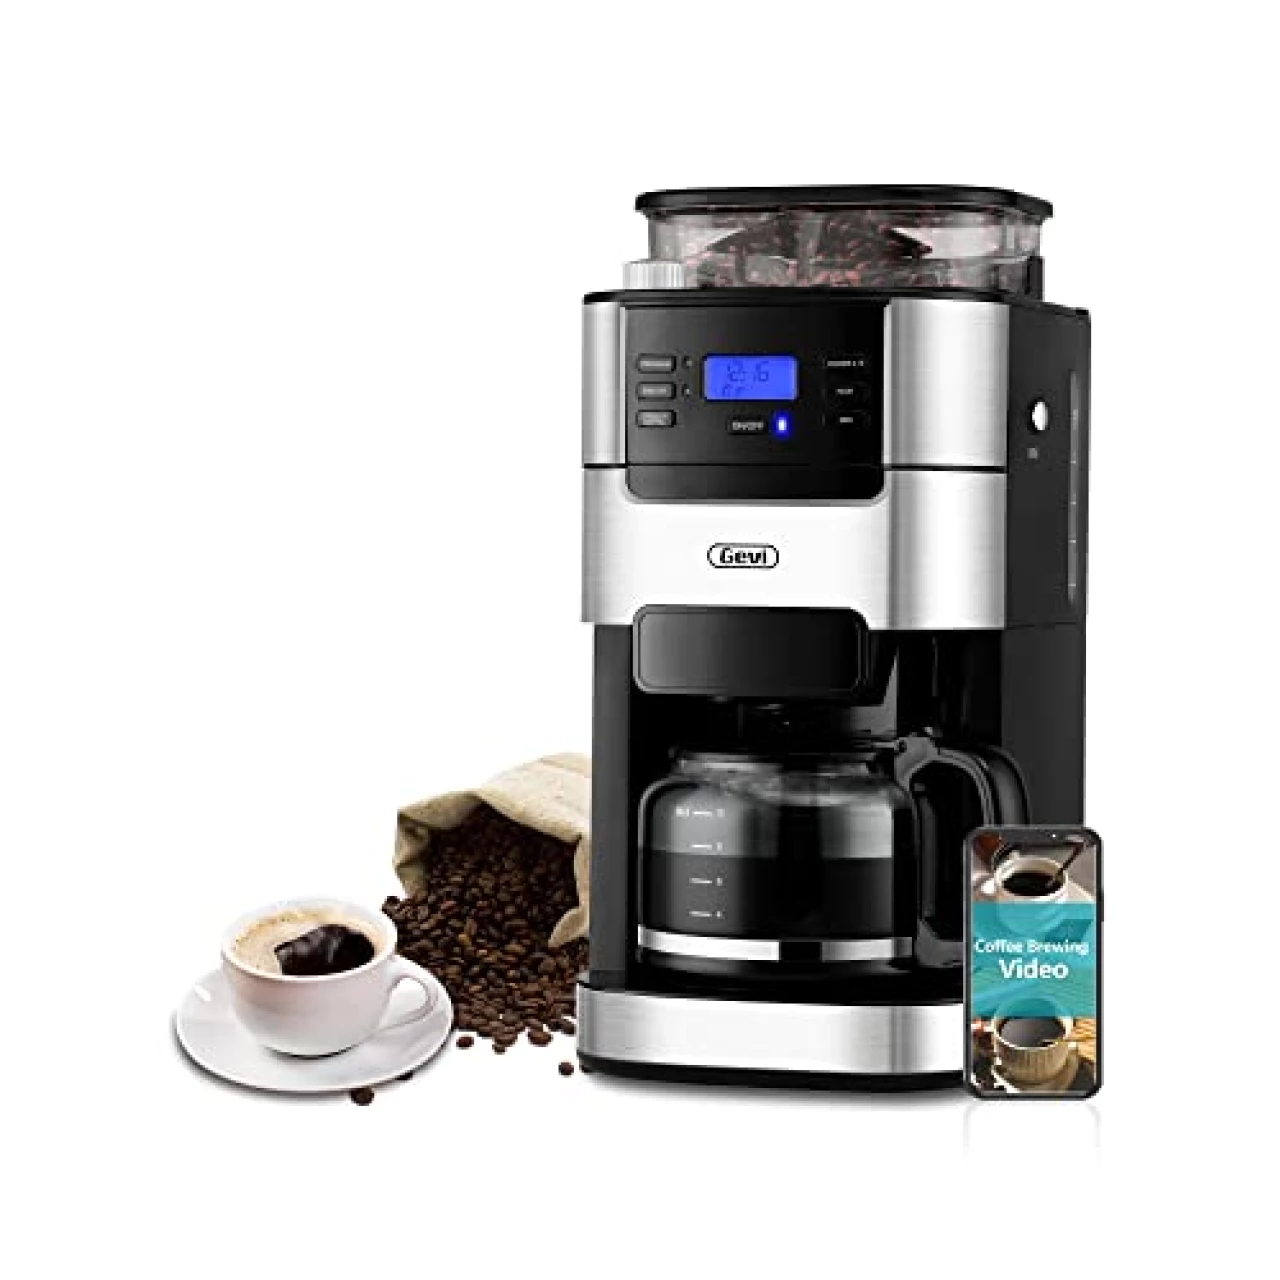 10-Cup Drip Coffee Maker, Grind and Brew Automatic Coffee Machine with Built-In Burr Coffee Grinder